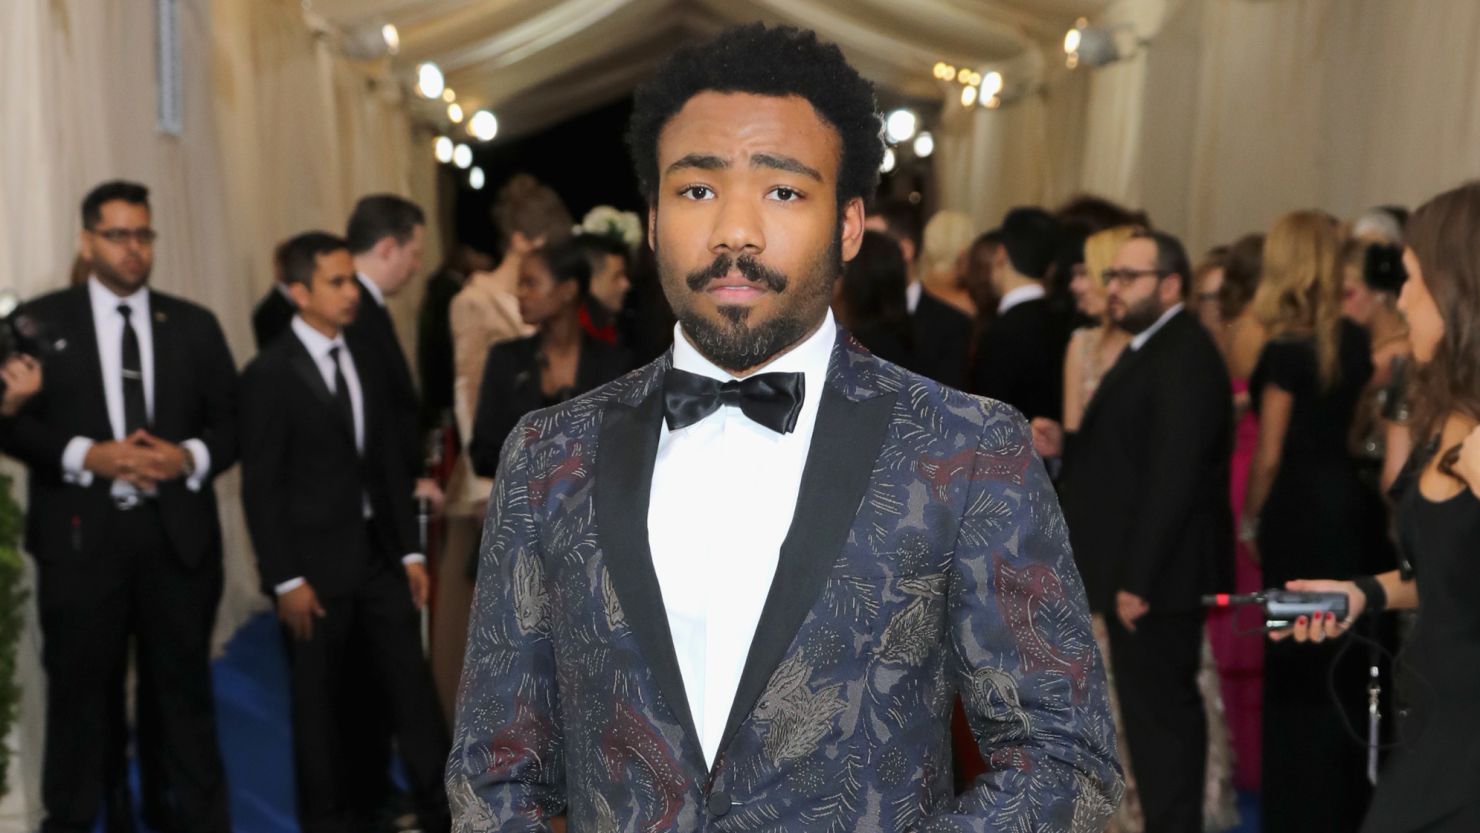 NEW YORK, NY - MAY 01:  Donald Glover attends the "Rei Kawakubo/Comme des Garcons: Art Of The In-Between" Costume Institute Gala at Metropolitan Museum of Art on May 1, 2017 in New York City.  (Photo by Neilson Barnard/Getty Images)